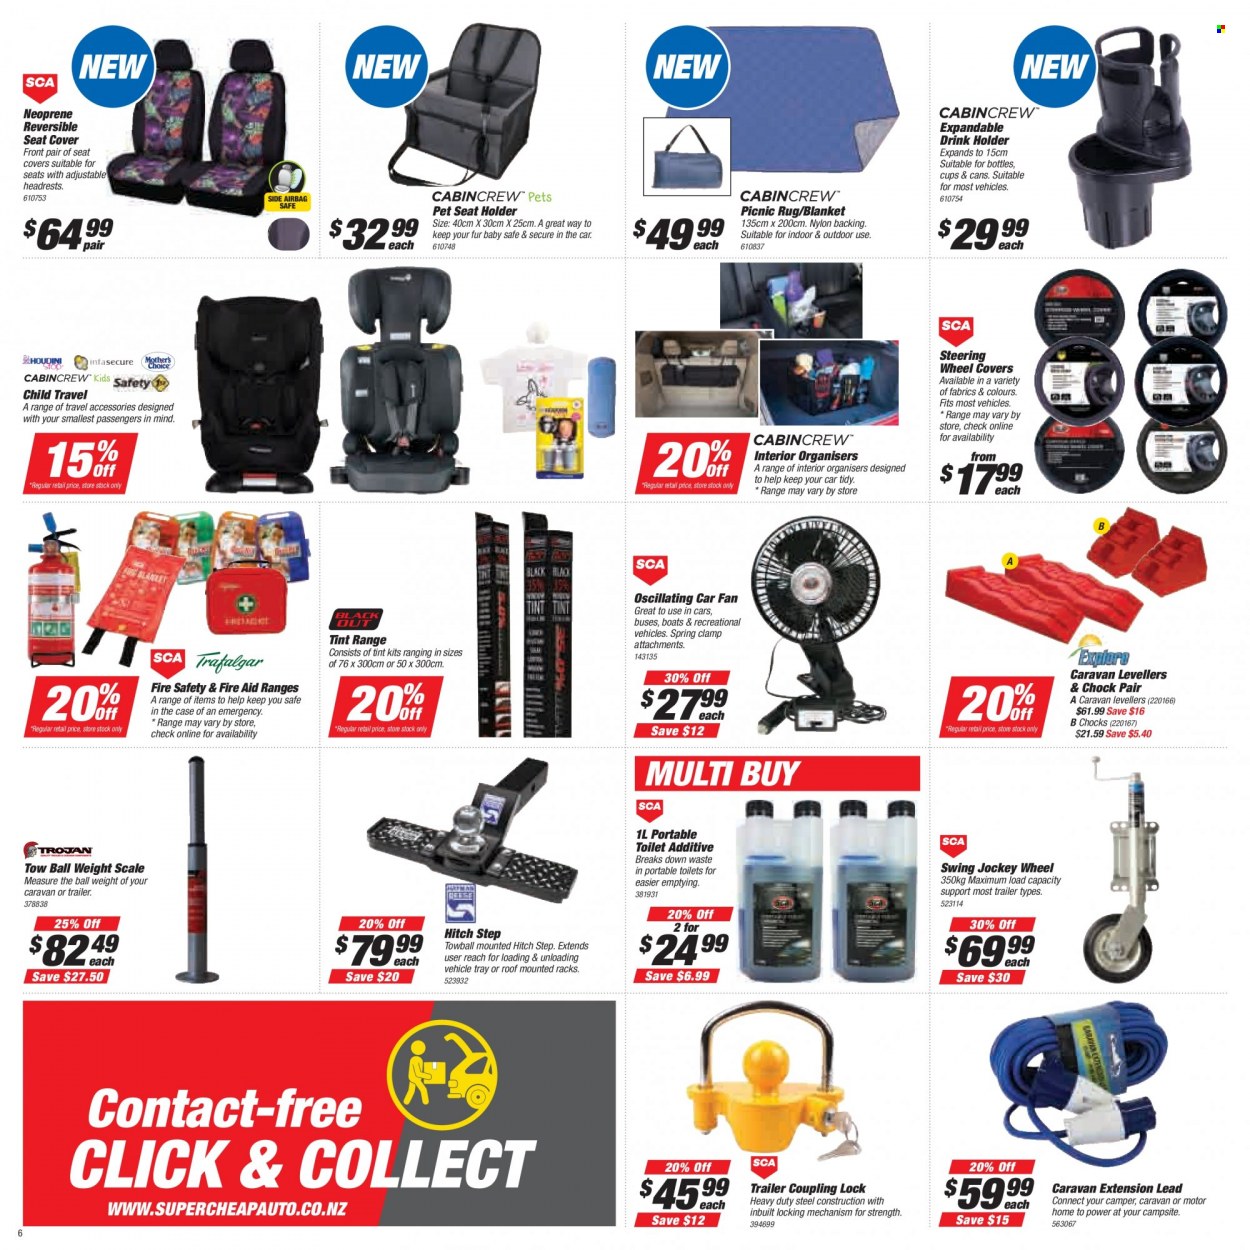 thumbnail - SuperCheap Auto mailer - 16.09.2021 - 26.09.2021 - Sales products - holder, blanket, tray, extension lead, vehicle, trailer, car seat cover, hitch step, travel accessories, drink holder, caravan extension lead, wheel covers. Page 6.